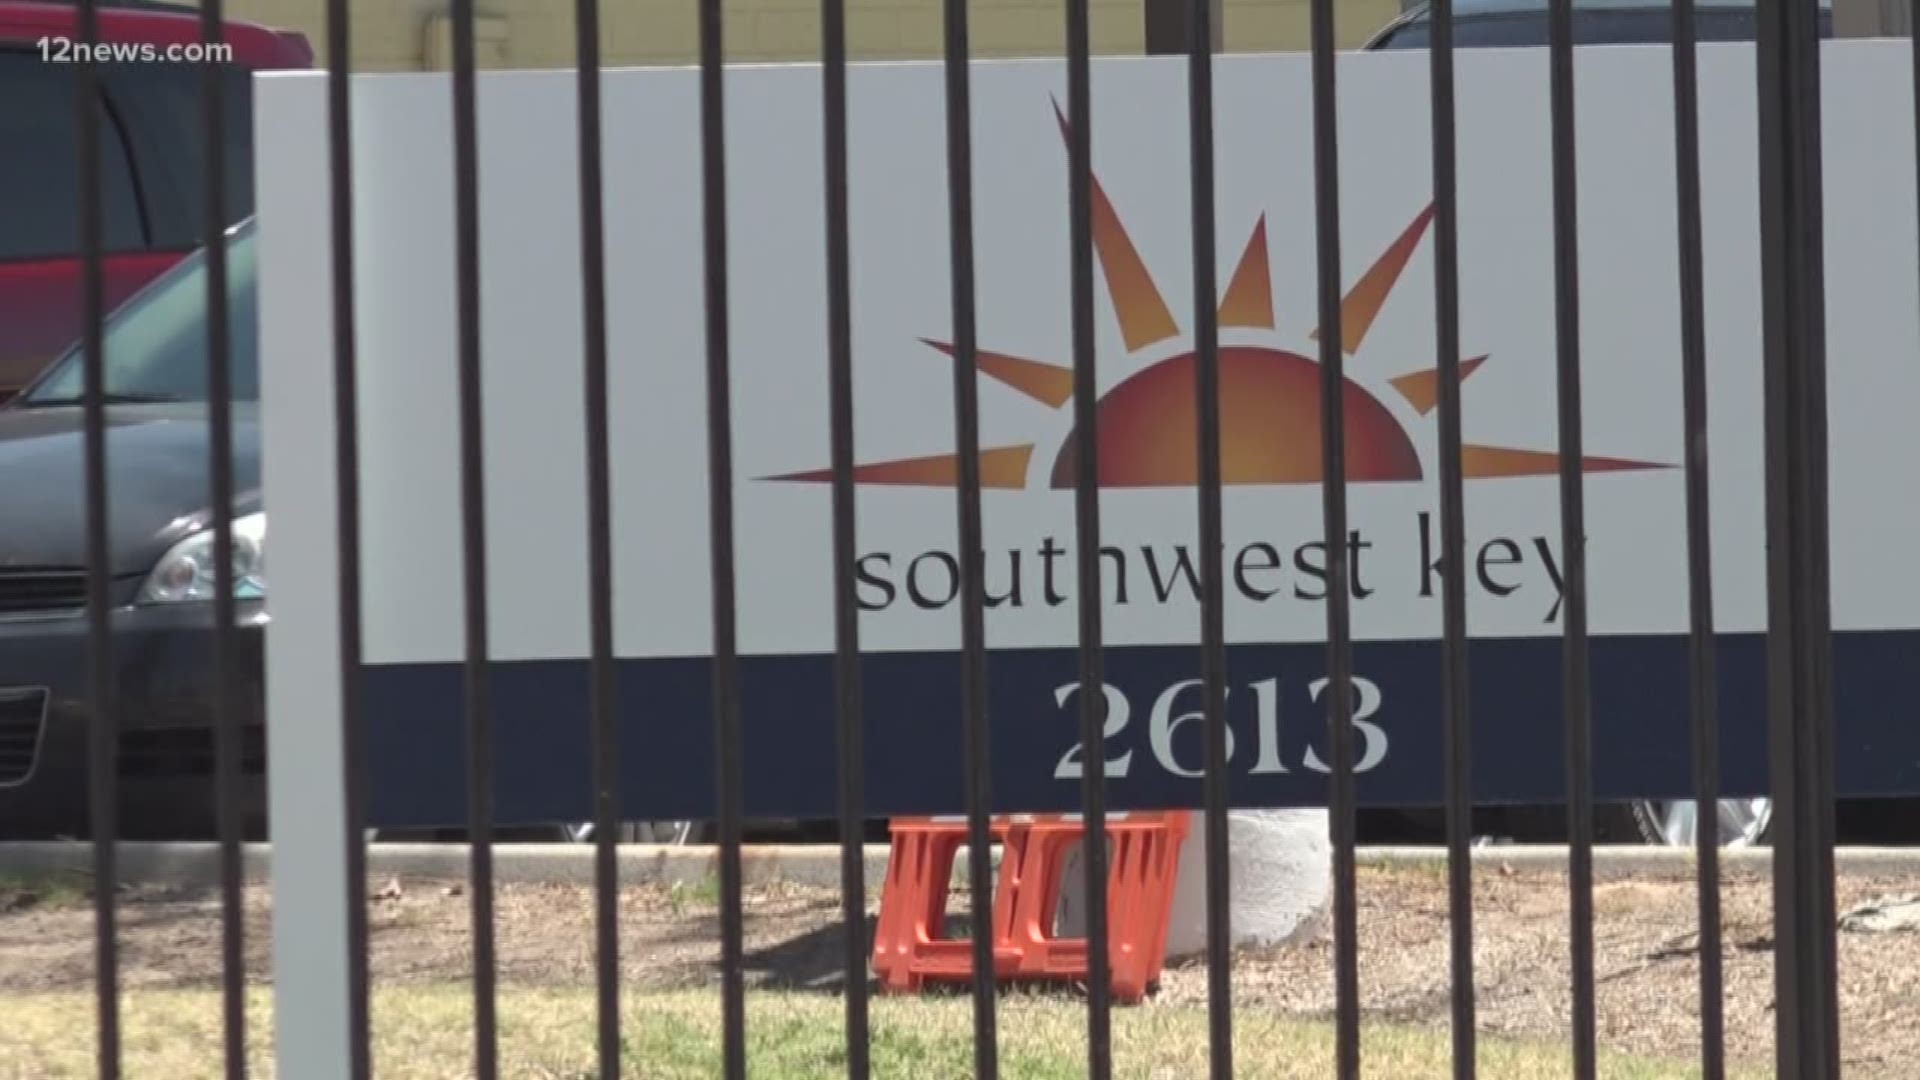 After reports of abuse the state is doing a sweeping inspection of all Southwest Key facilities. Southwest Key takes half-a-billion dollars from the federal government to take care of migrant children.